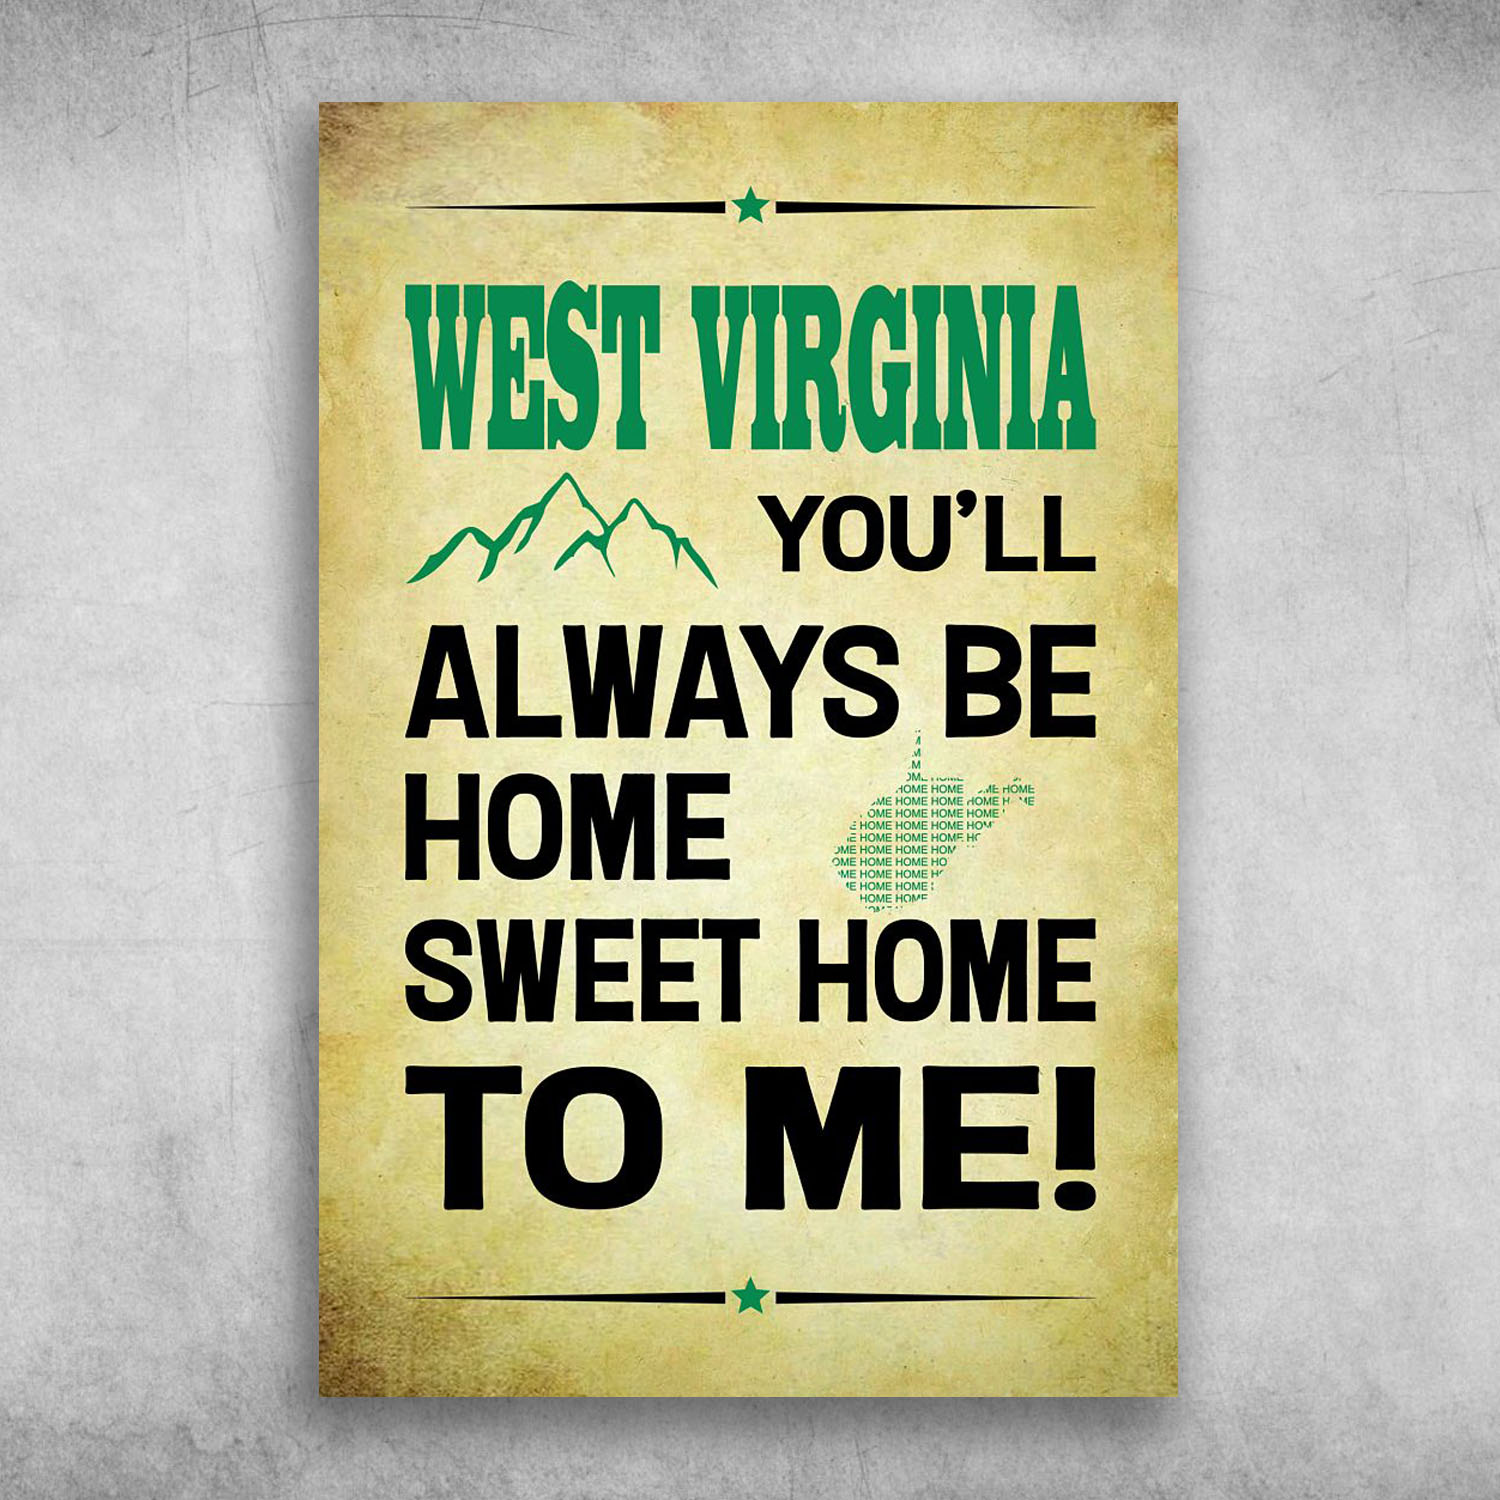 West Virginia You'll Always Be Home Sweet Home